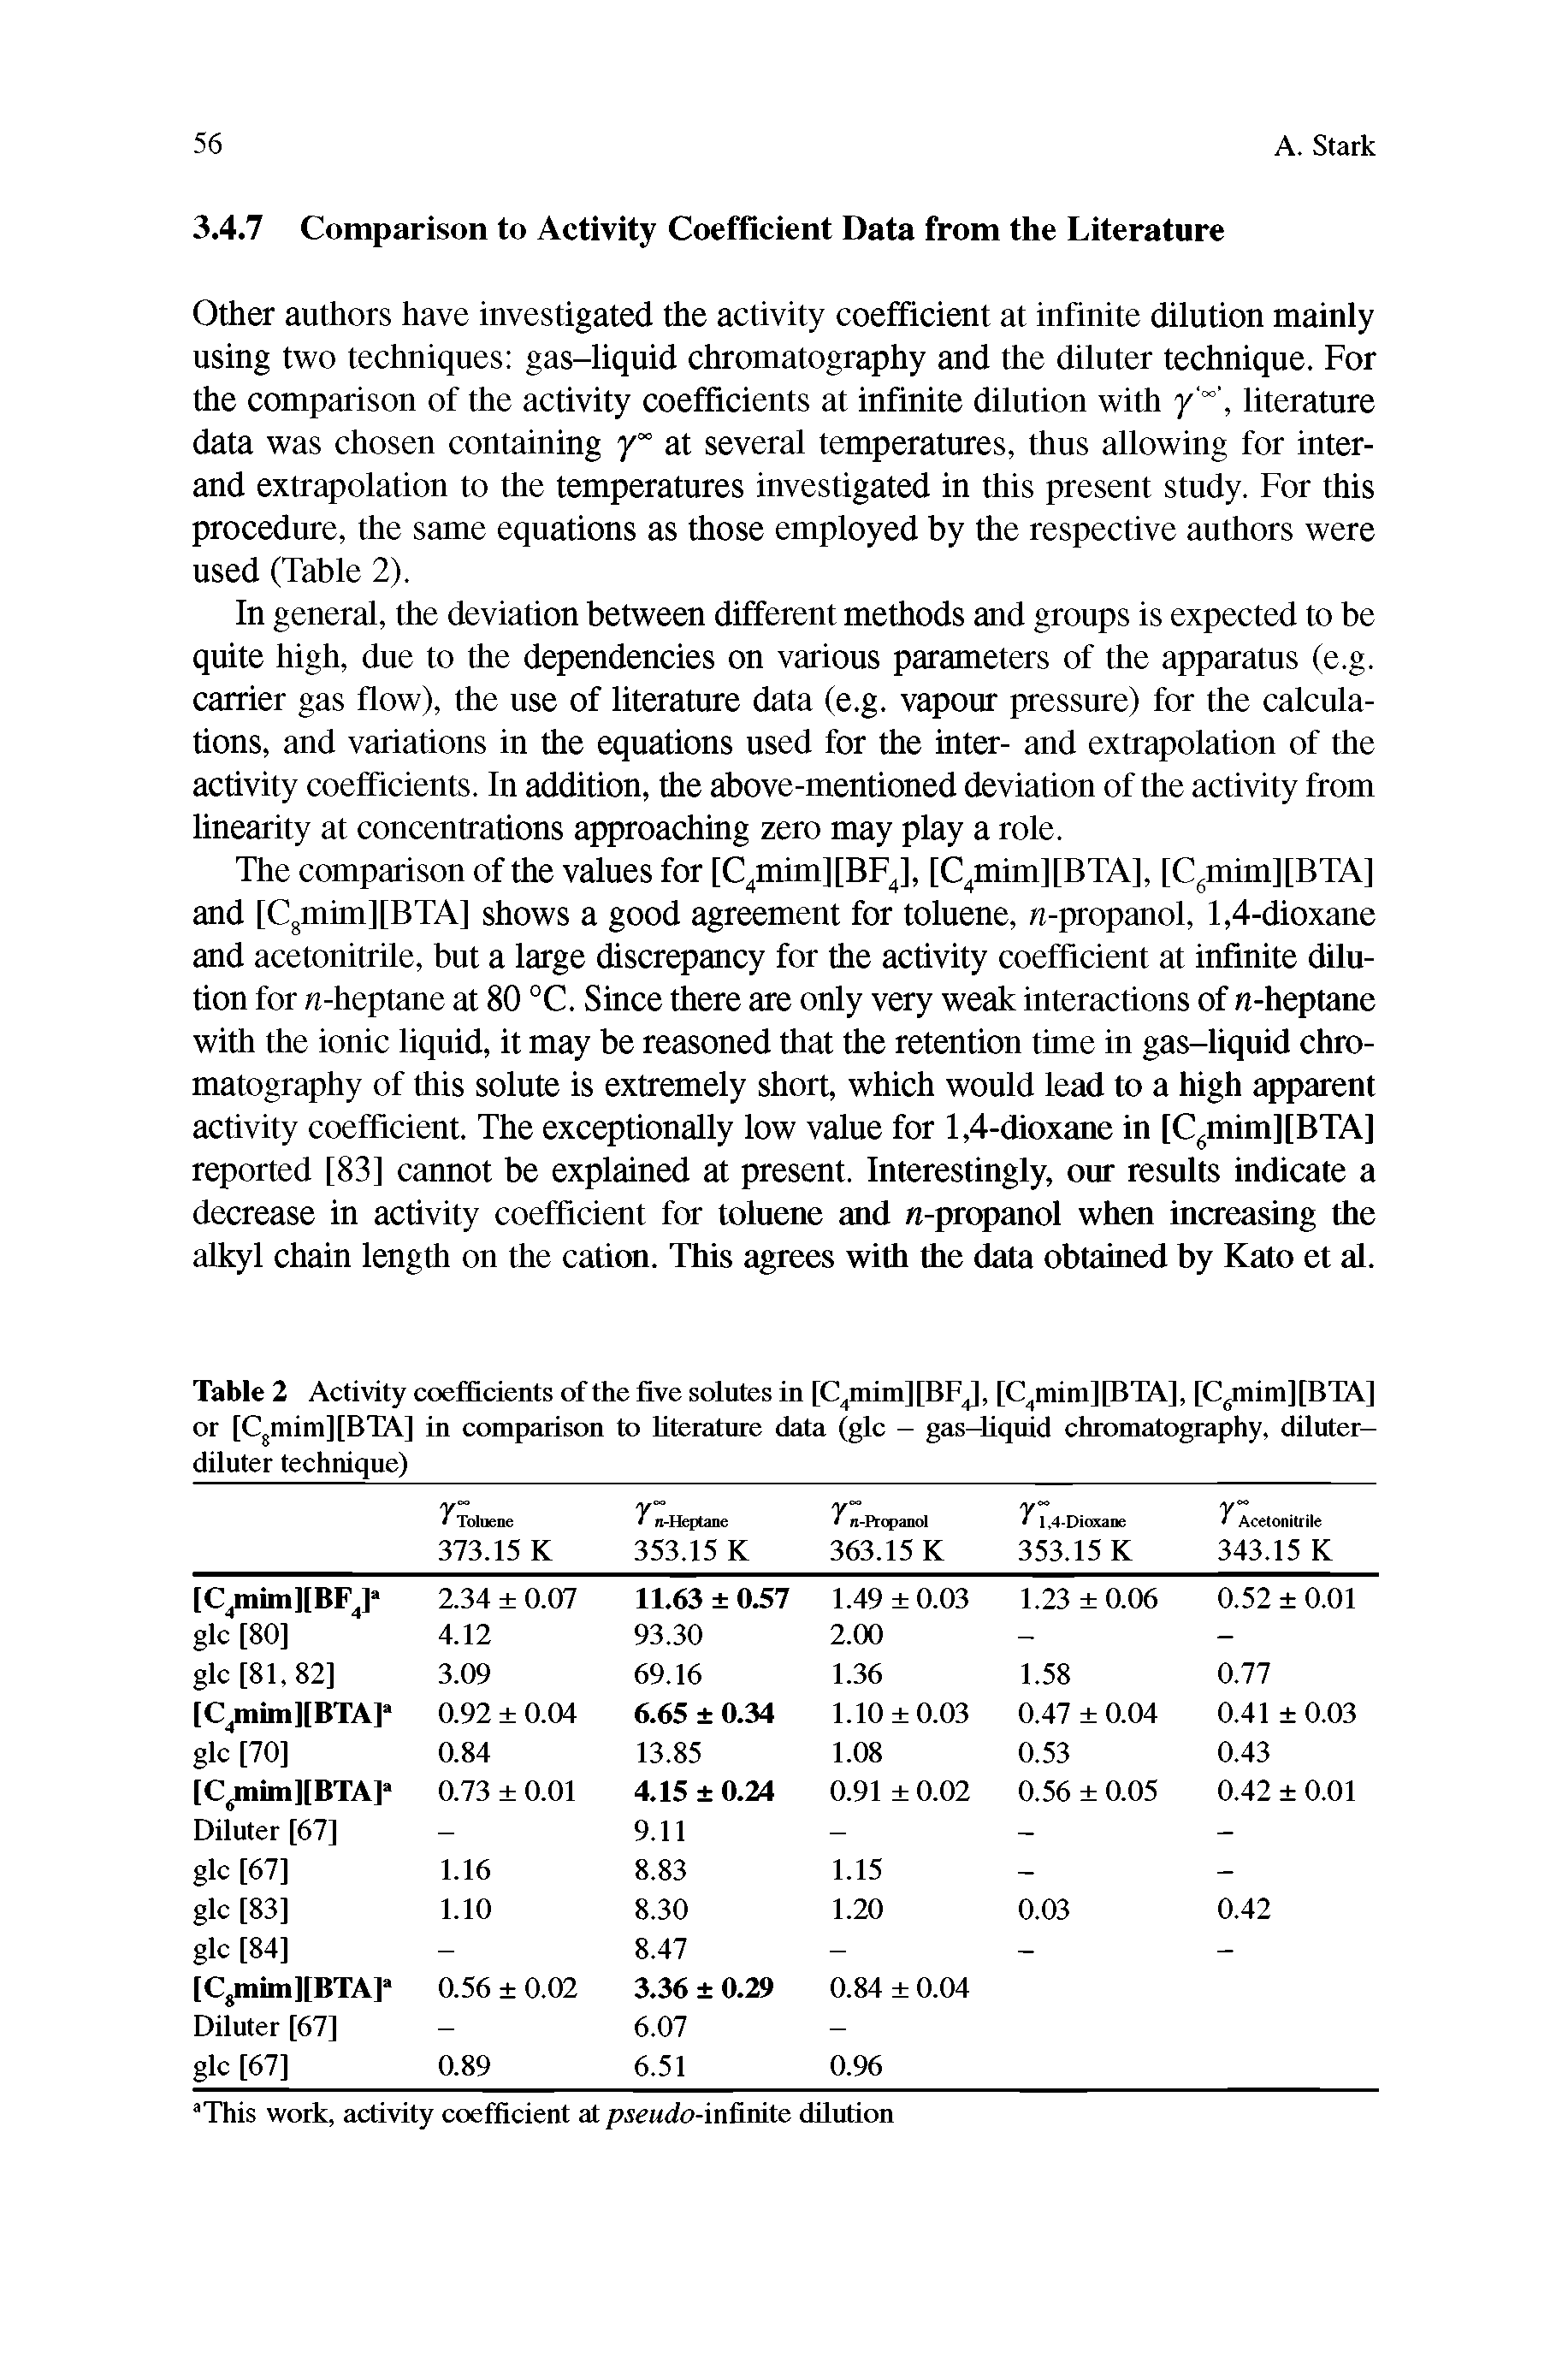 Table 2 Activity coefficients of the five solutes in C4mim BI 4, [C4mim][BTA], [C6mim][BTA] or [C8mim][BTA] in comparison to literature data (glc - gas-liquid chromatography, diluter-diluter technique)...